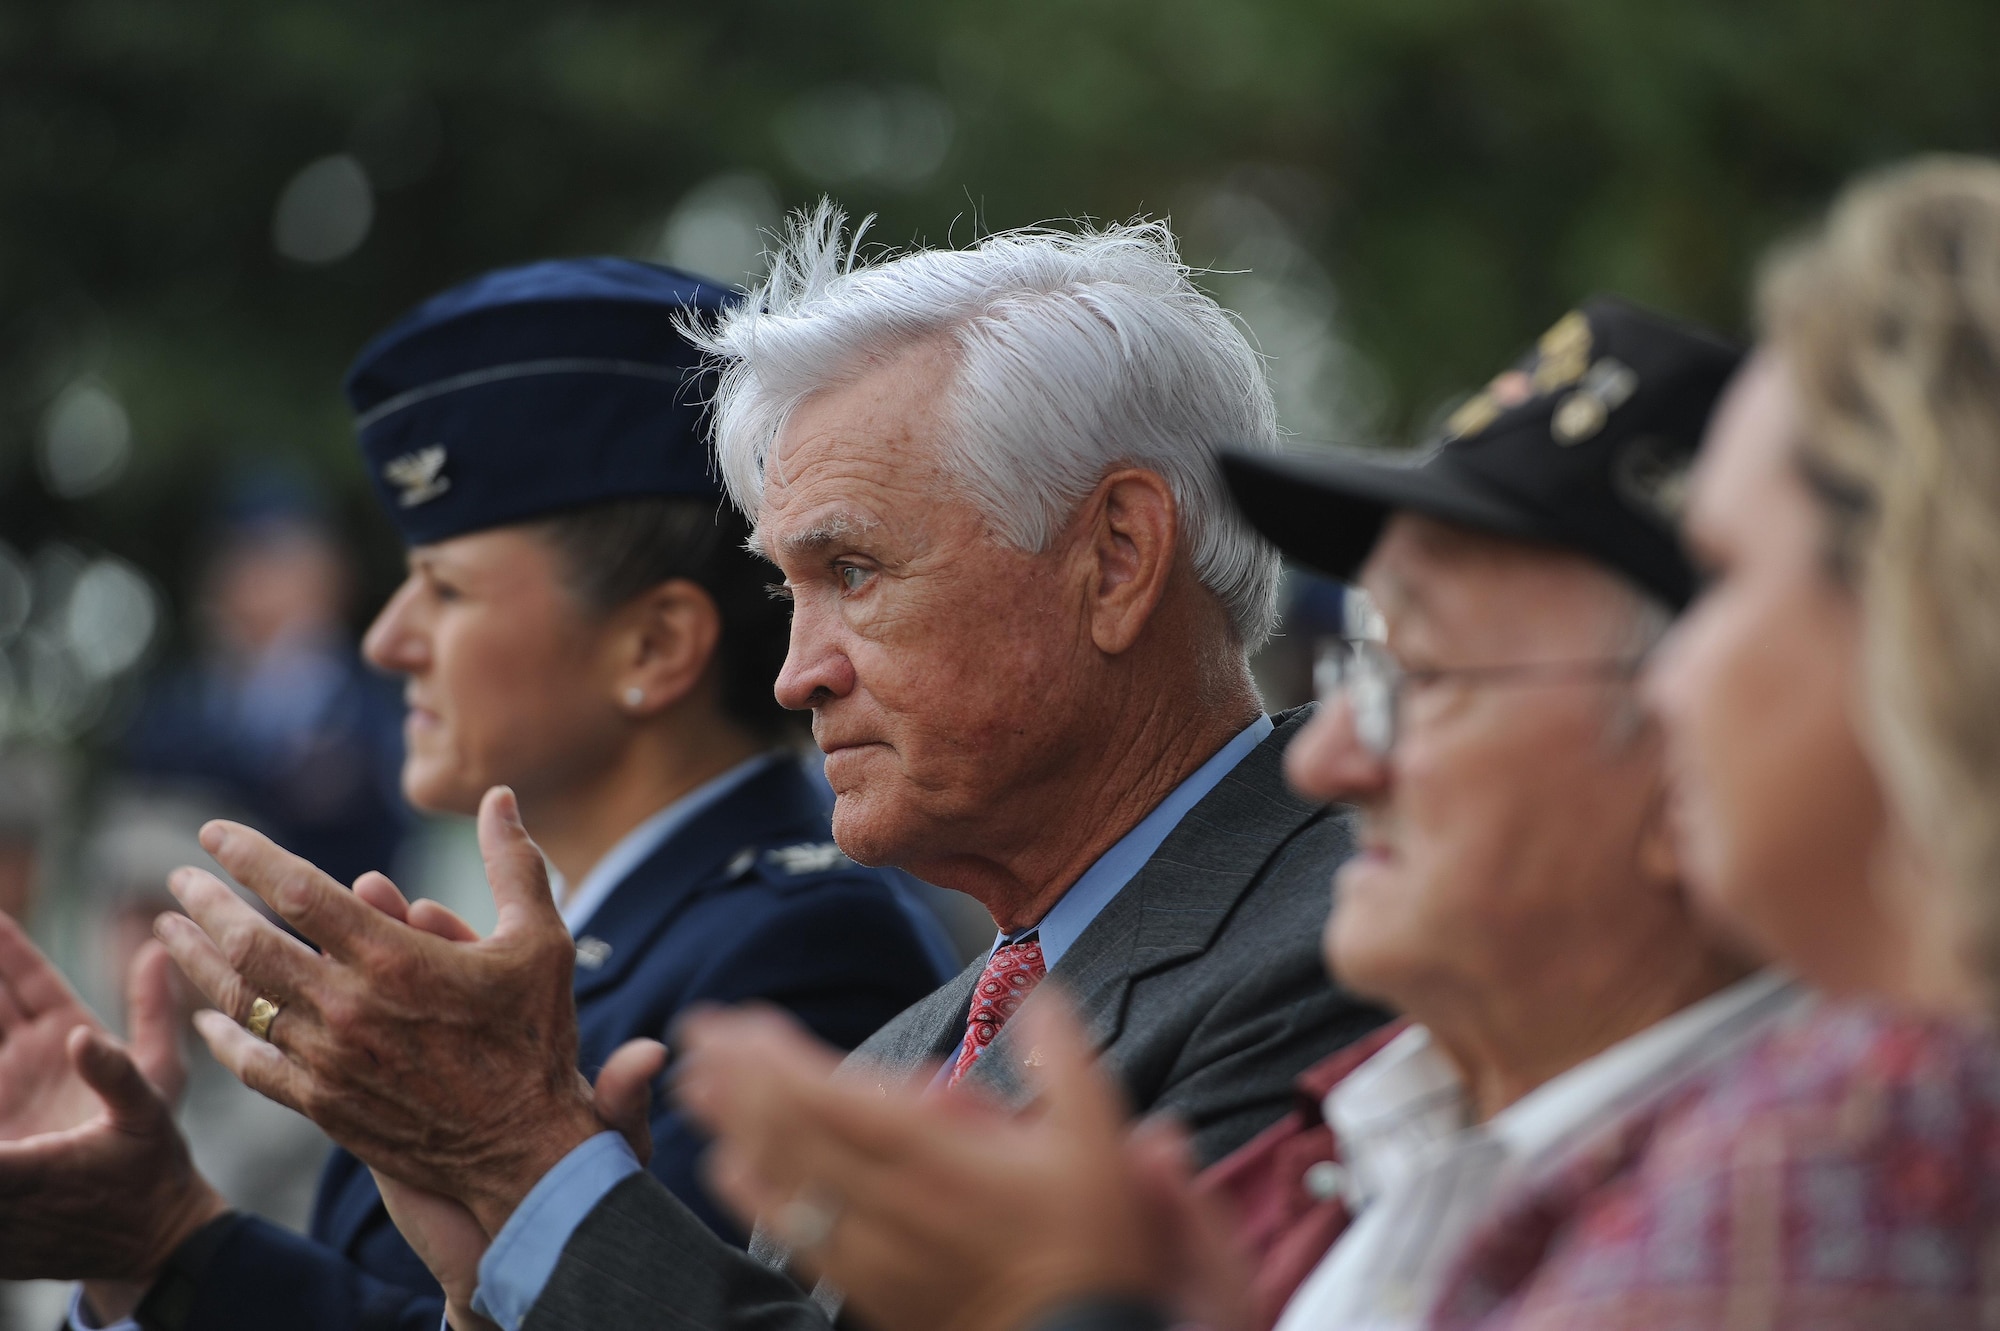 U.S. Air Force Lt. Col. (Ret.) Barry Bridger, former 43rd Tactical Fighter Squadron F-4 Phantom aircraft commander, claps during a POW/MIA closing ceremony at Joint Base Langley-Eustis, Va., Sept. 15, 2016. Bridger was shot down, captured and imprisoned for 2,232 days (six years) during the Vietnam War. The third Friday in September has been observed as POW/MIA Recognition Day since 1986. Since World War I, more than 150,000 Americans have been held as prisoners of war and more than 83,400 service members are still unaccounted for. (U.S. Air Force photo by Staff Sgt. Nick Wilson)